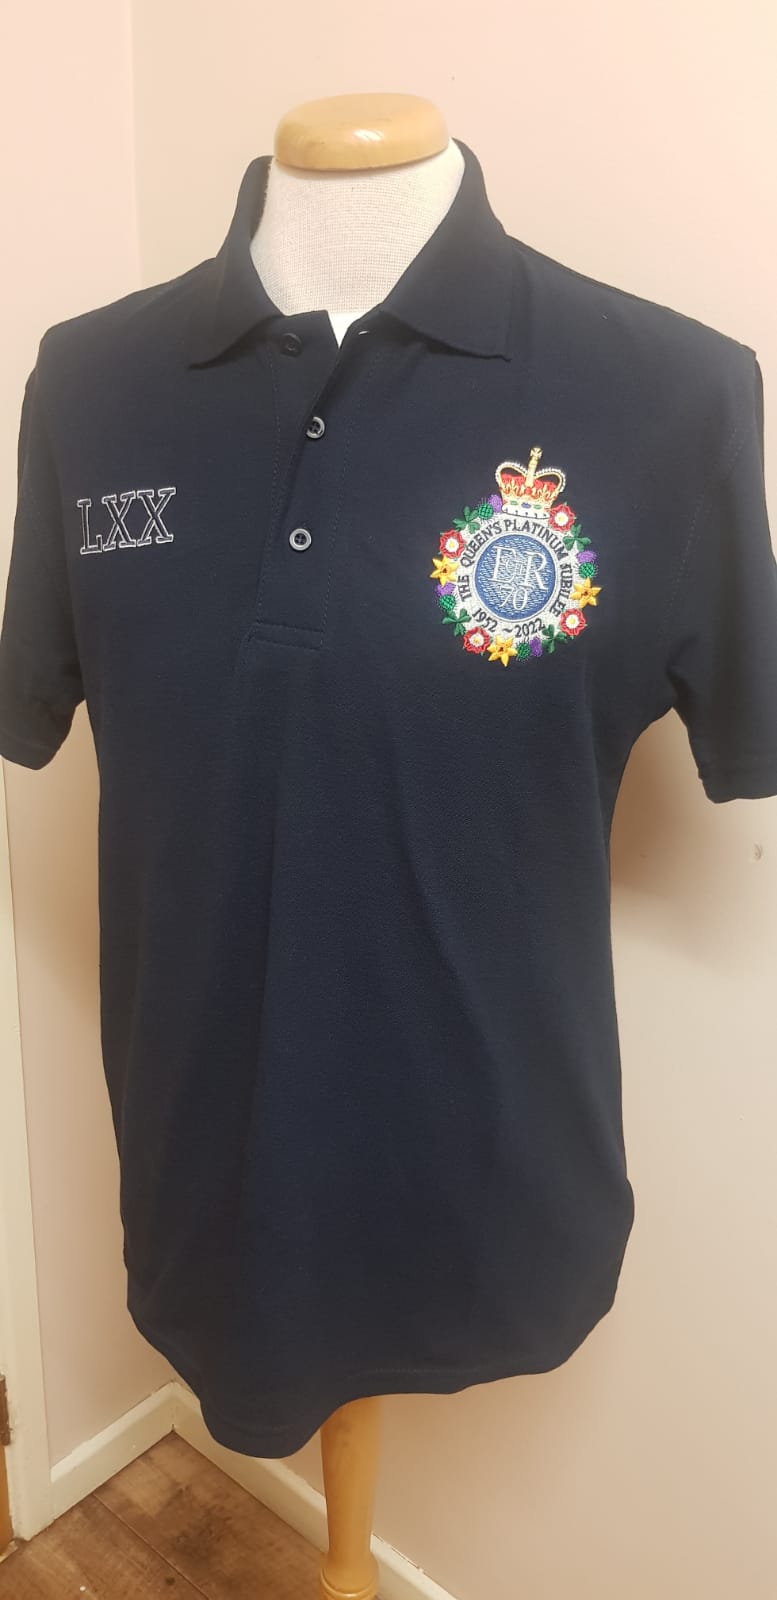 The Queen's Platinum Jubilee Commemorative Polo Shirt